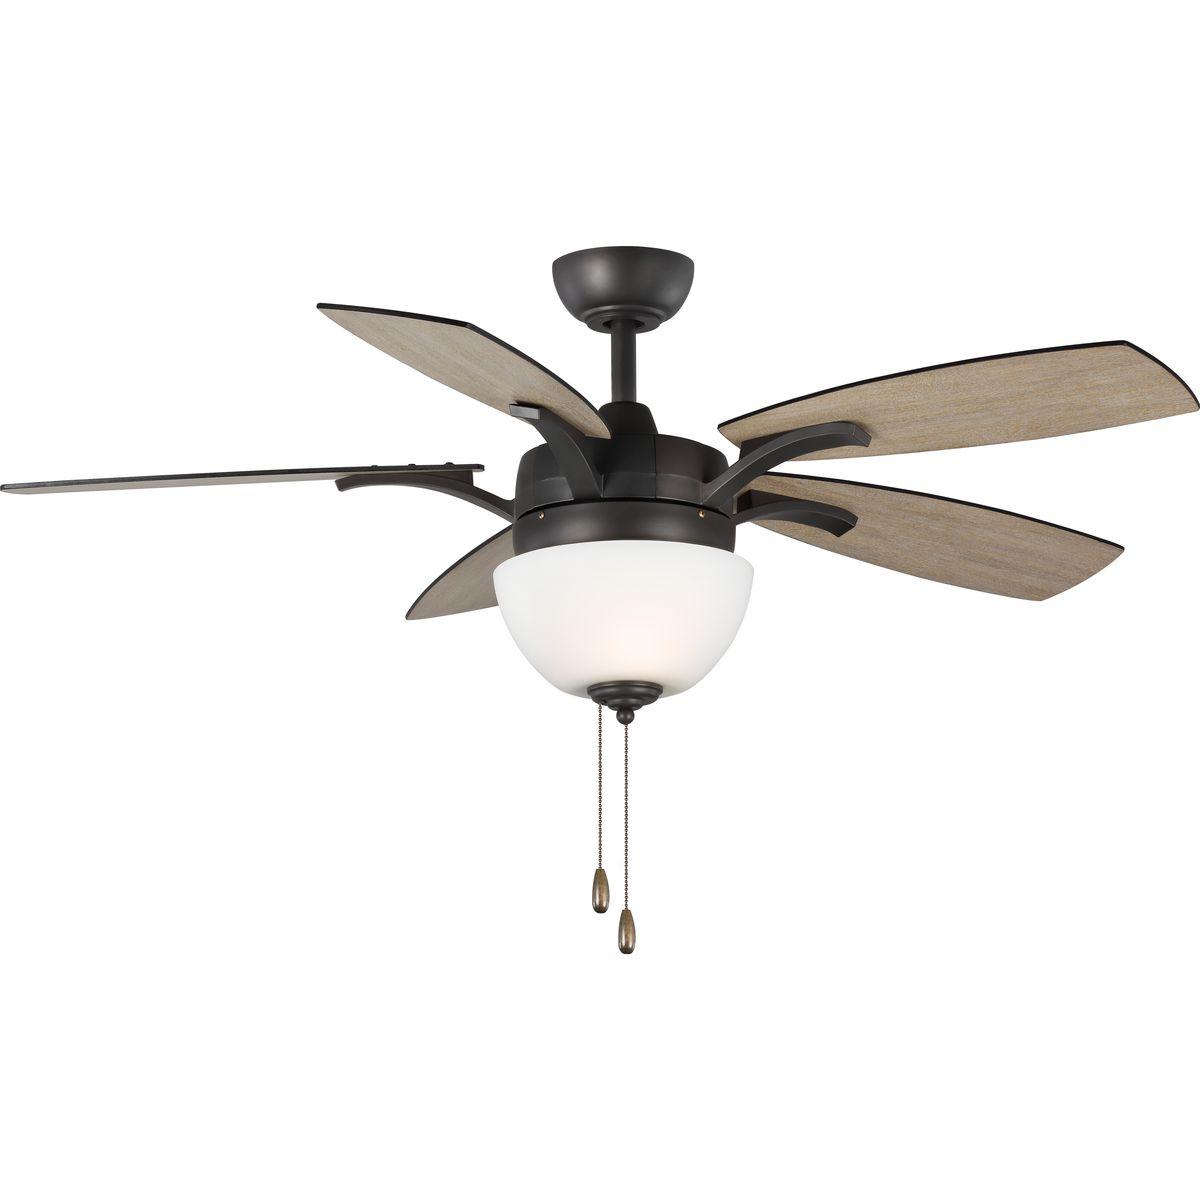 Hubbell P2598-143 The 52 in Olson five-blade ceiling fan features a generously sized etched watermark glass shade and sweeping blades highlighted with metal accents. Two 9W LED lamps are JA8 compliant, offering both form and function with energy and cost-savings benefits. 